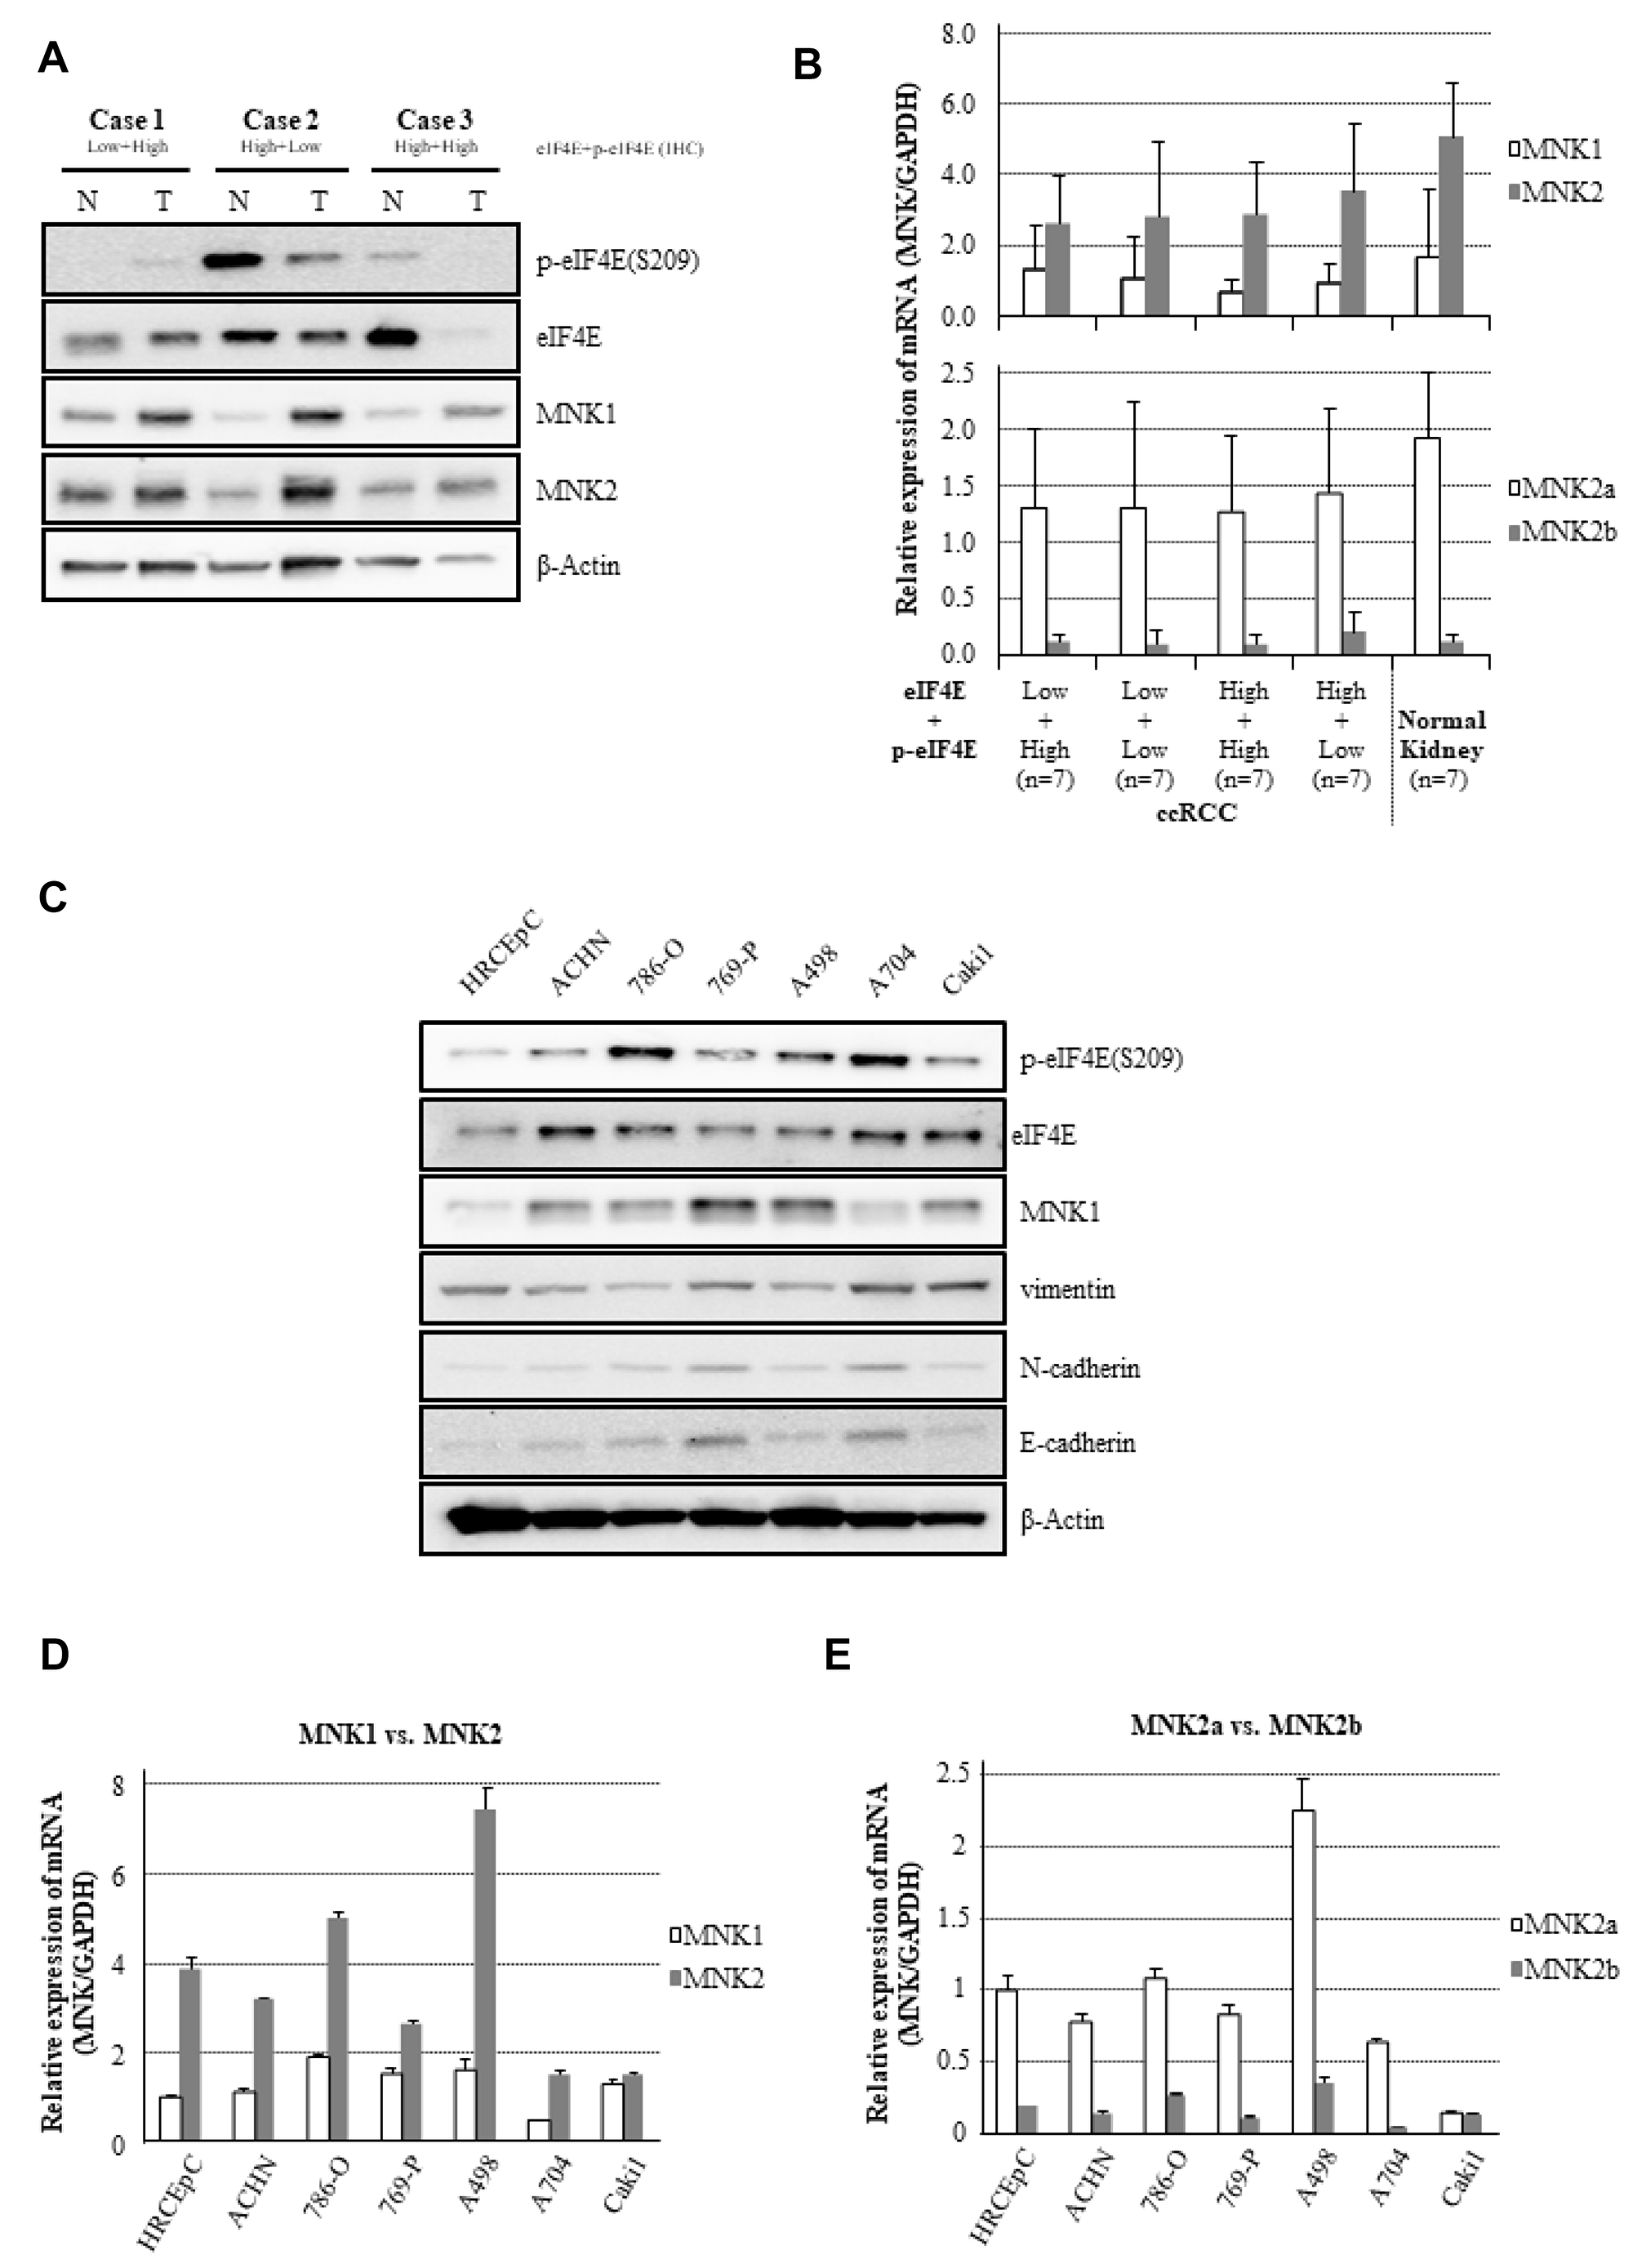 Expressional differences in MNK/eIF4E signaling and molecular markers on EMT.